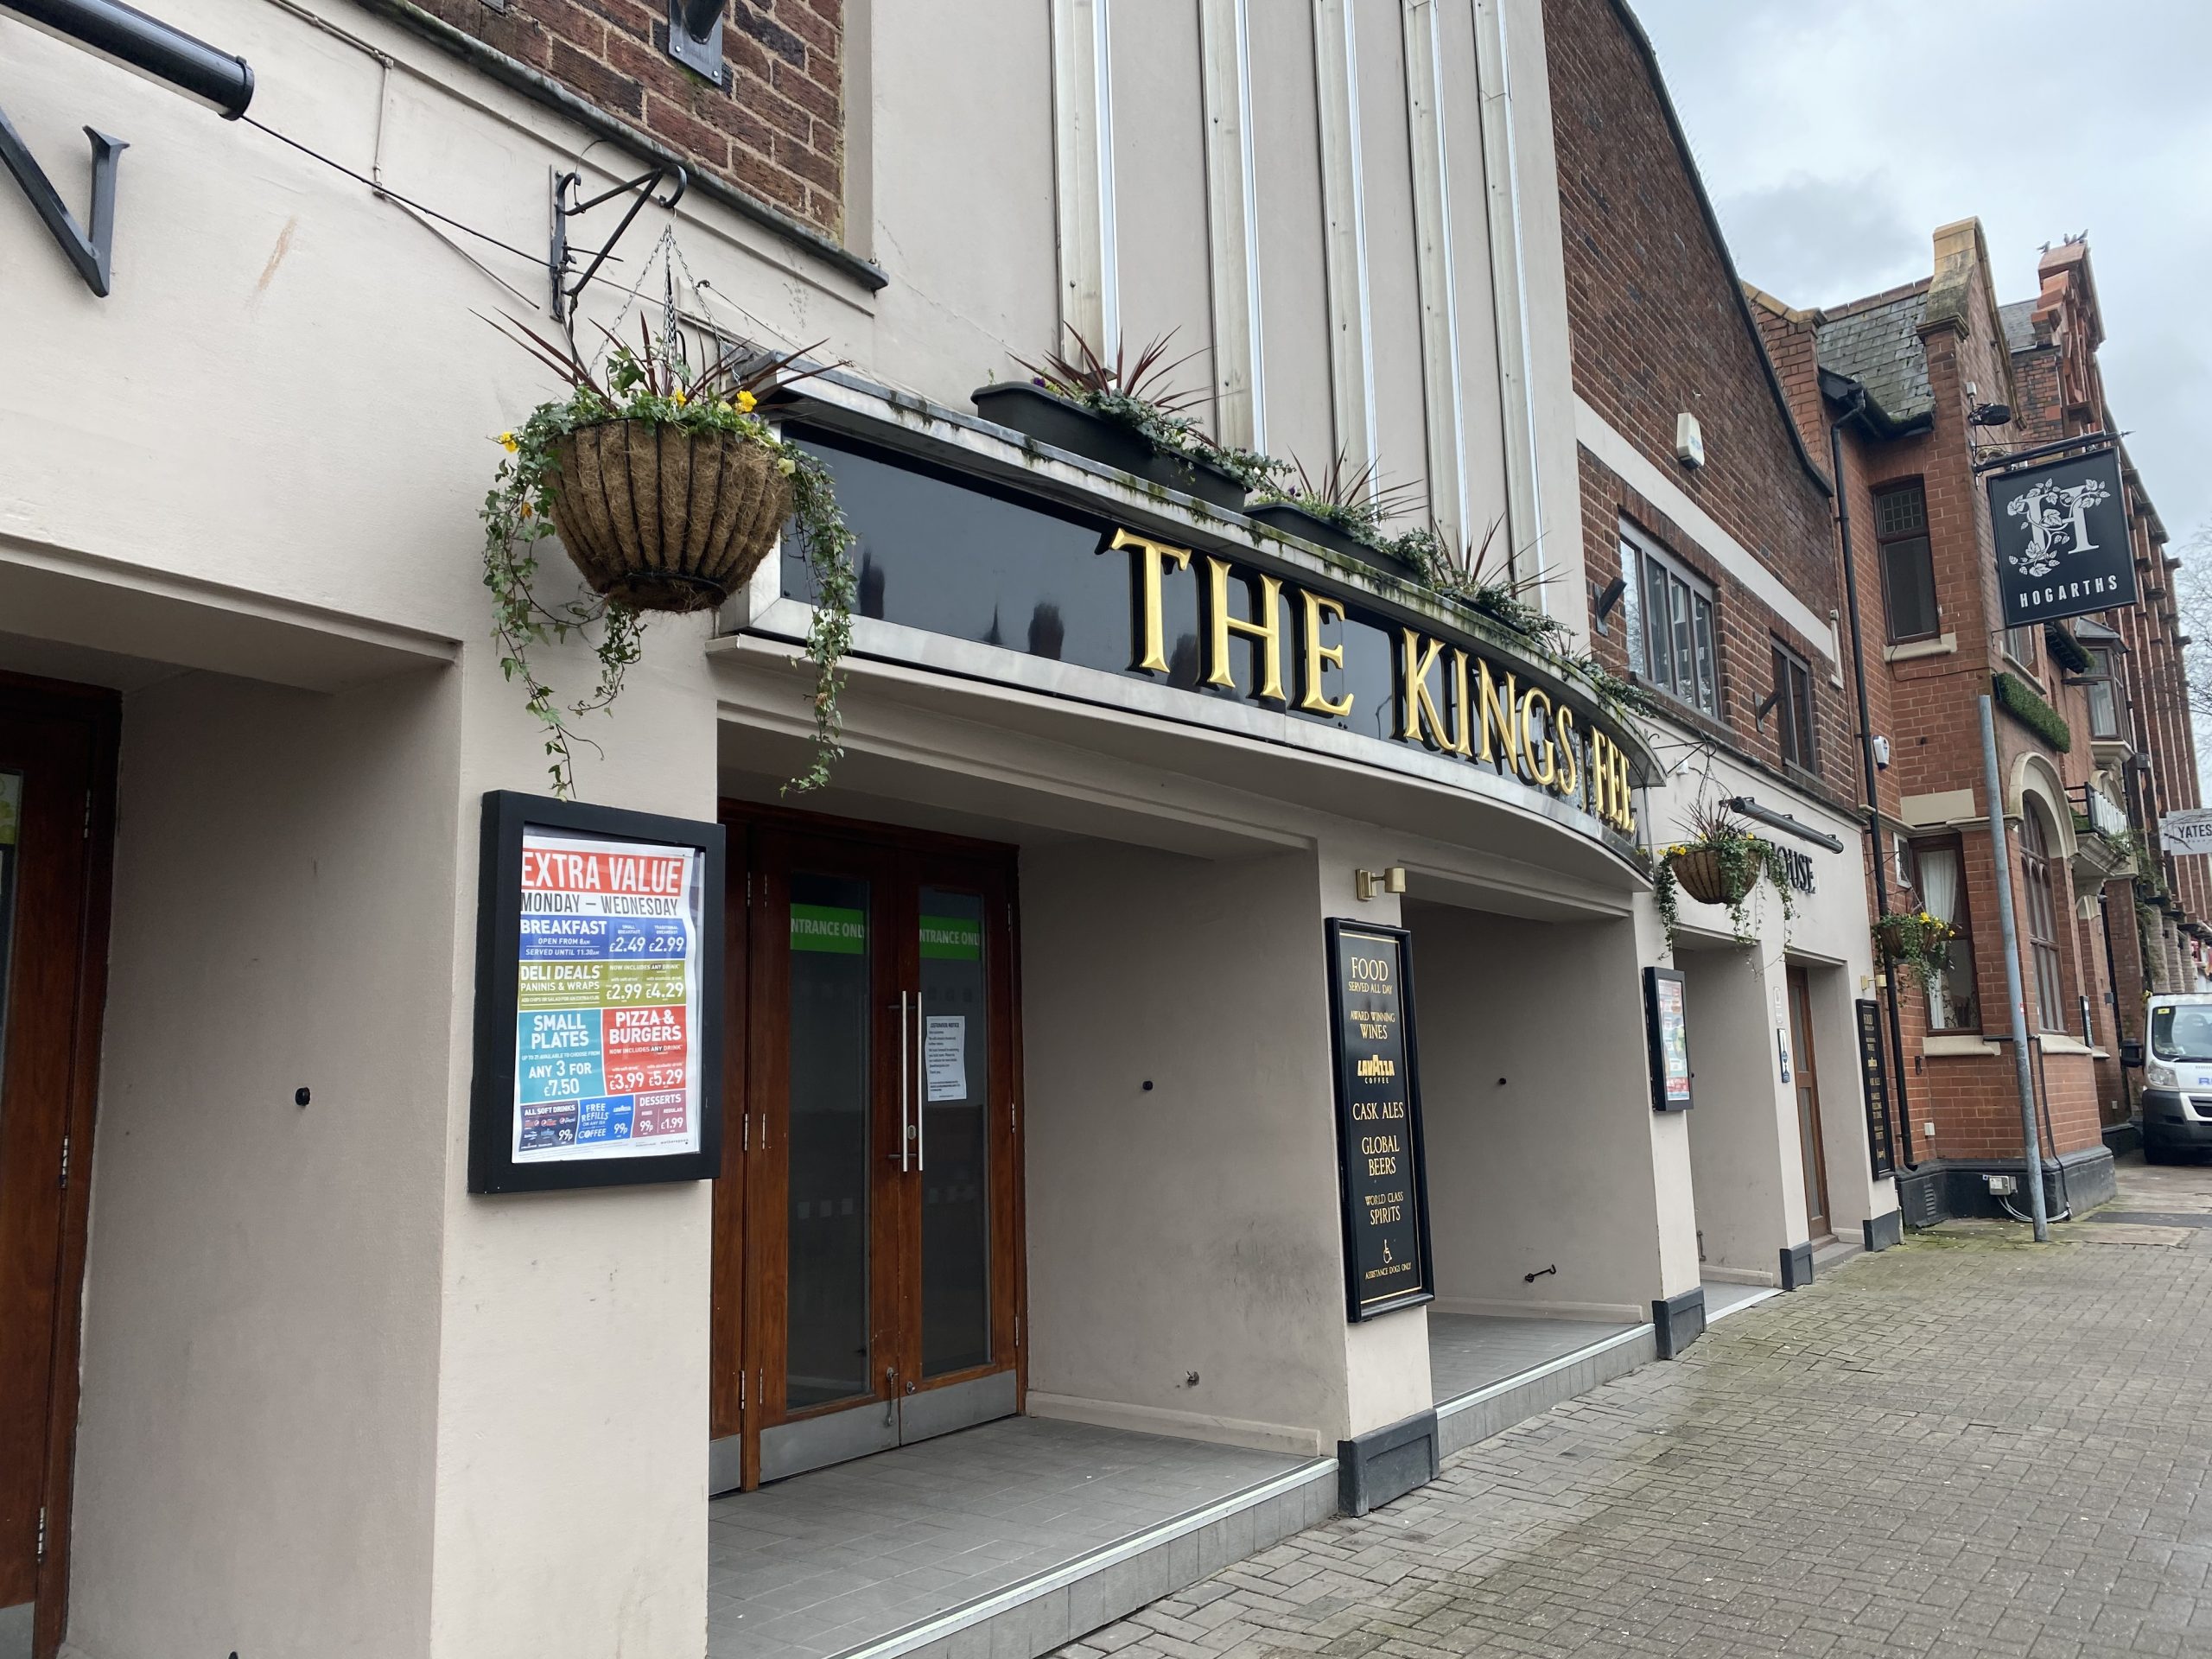 NEWS | Wetherspoon is to open beer gardens from 12th April